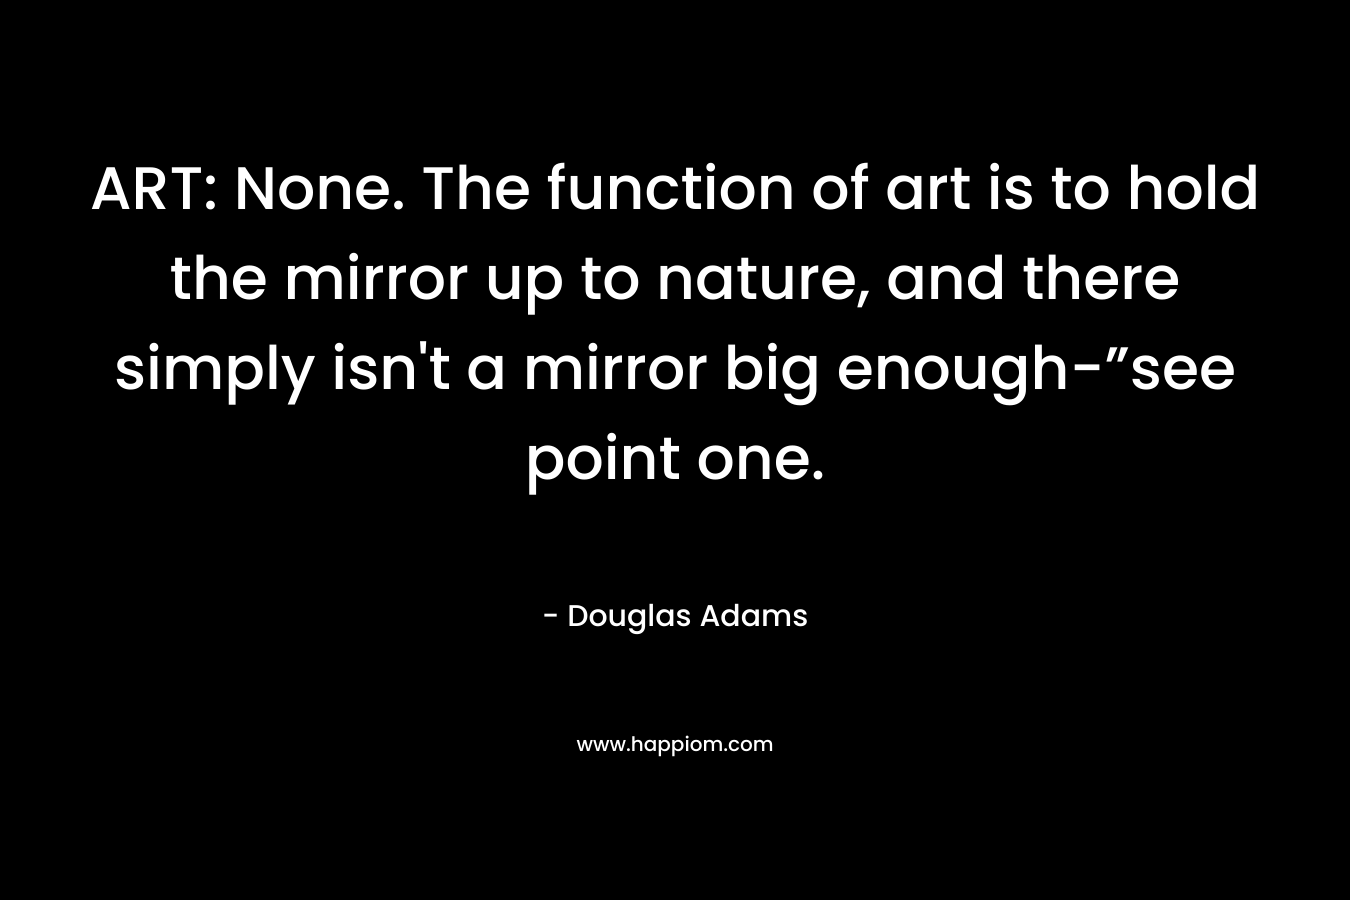 ART: None. The function of art is to hold the mirror up to nature, and there simply isn't a mirror big enough-”see point one.